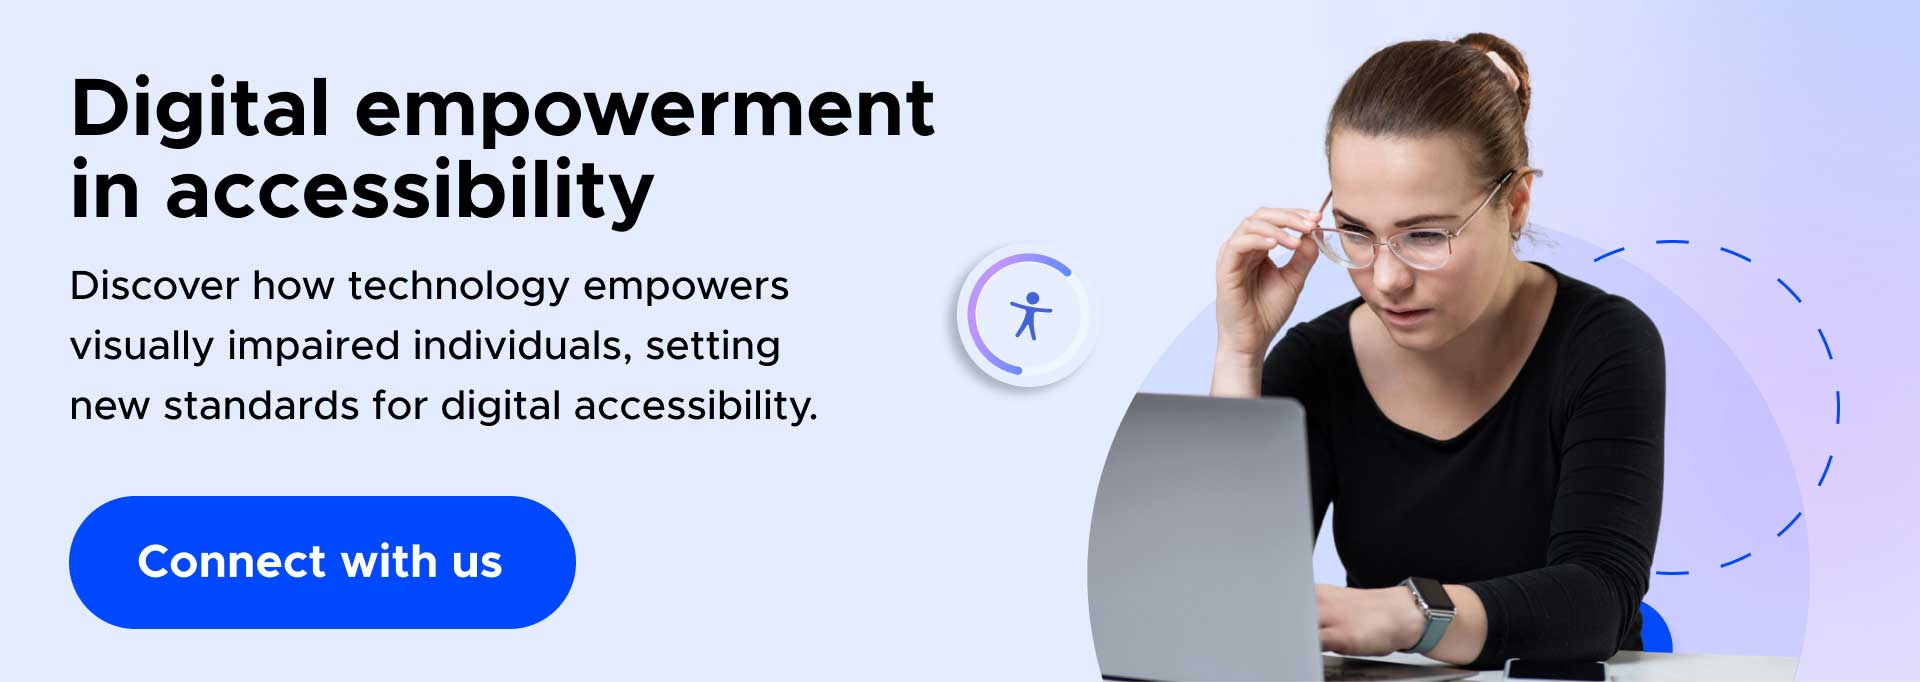 Digital empowerment in accessibility